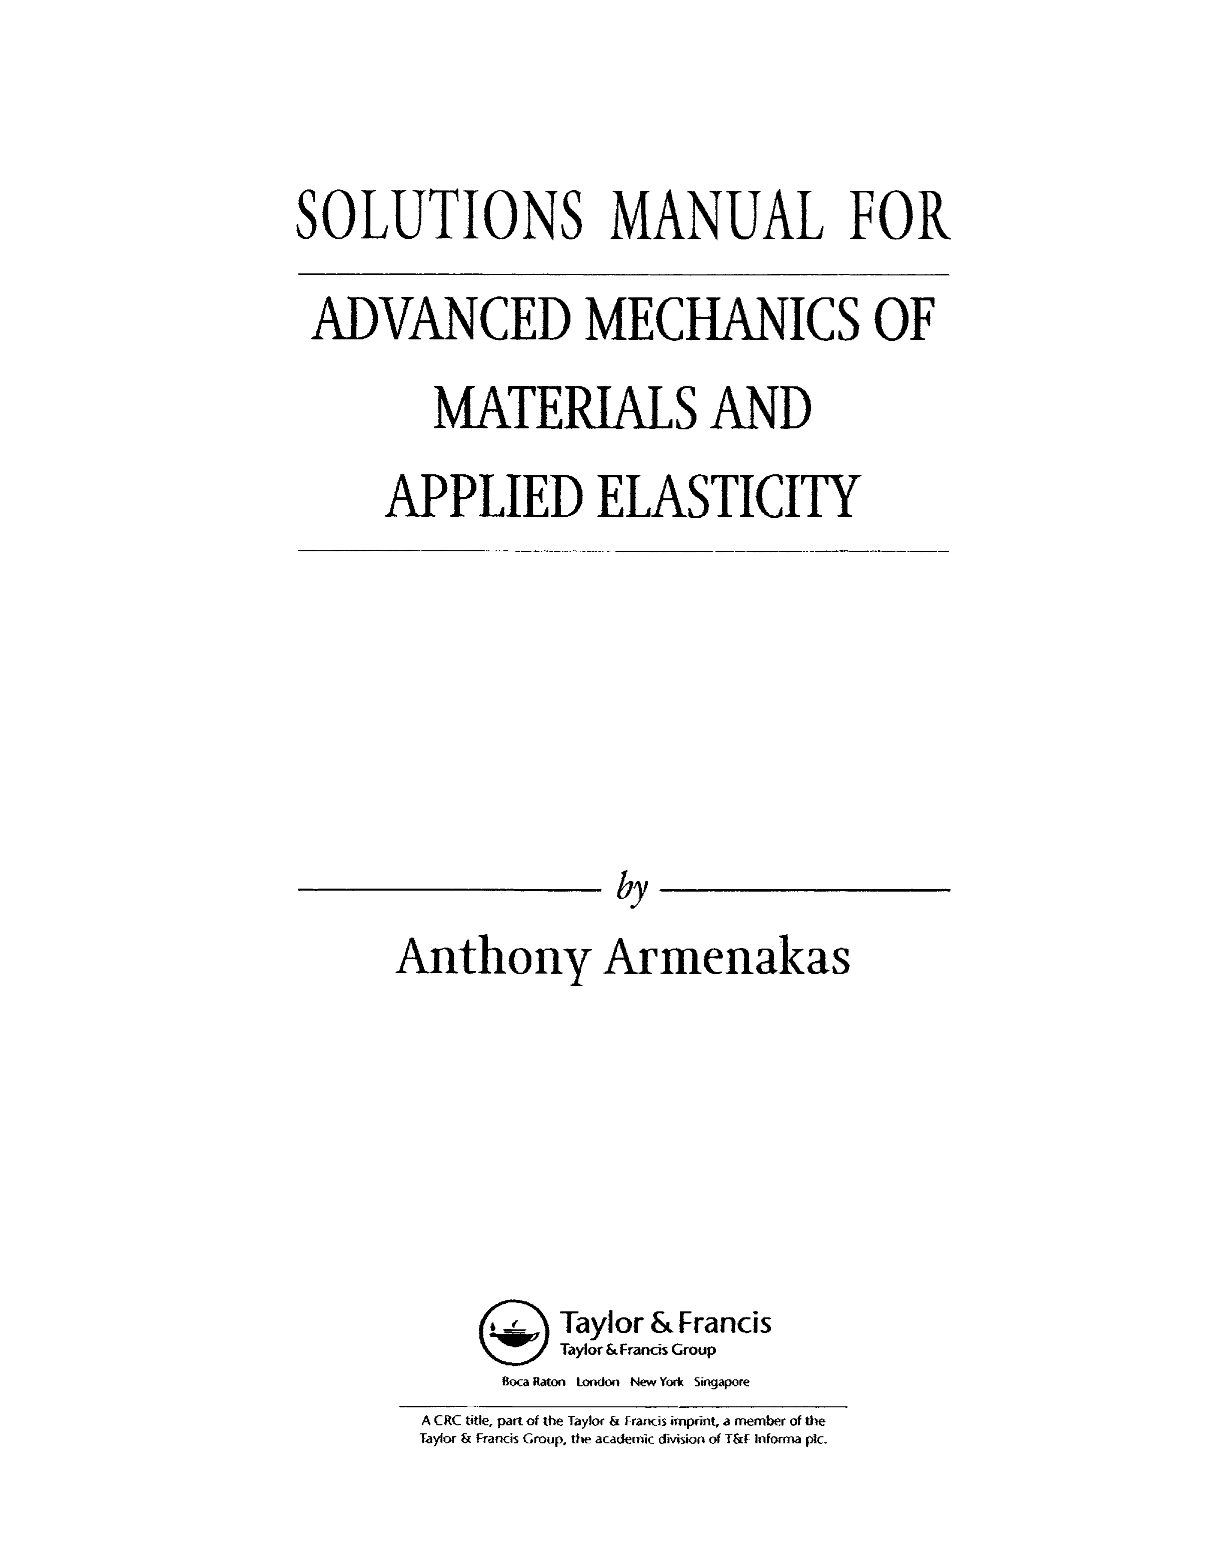 Download free advanced mechanics of materials and applied elasticity Anthony E. Armenakas 1st edition solution manual pdf